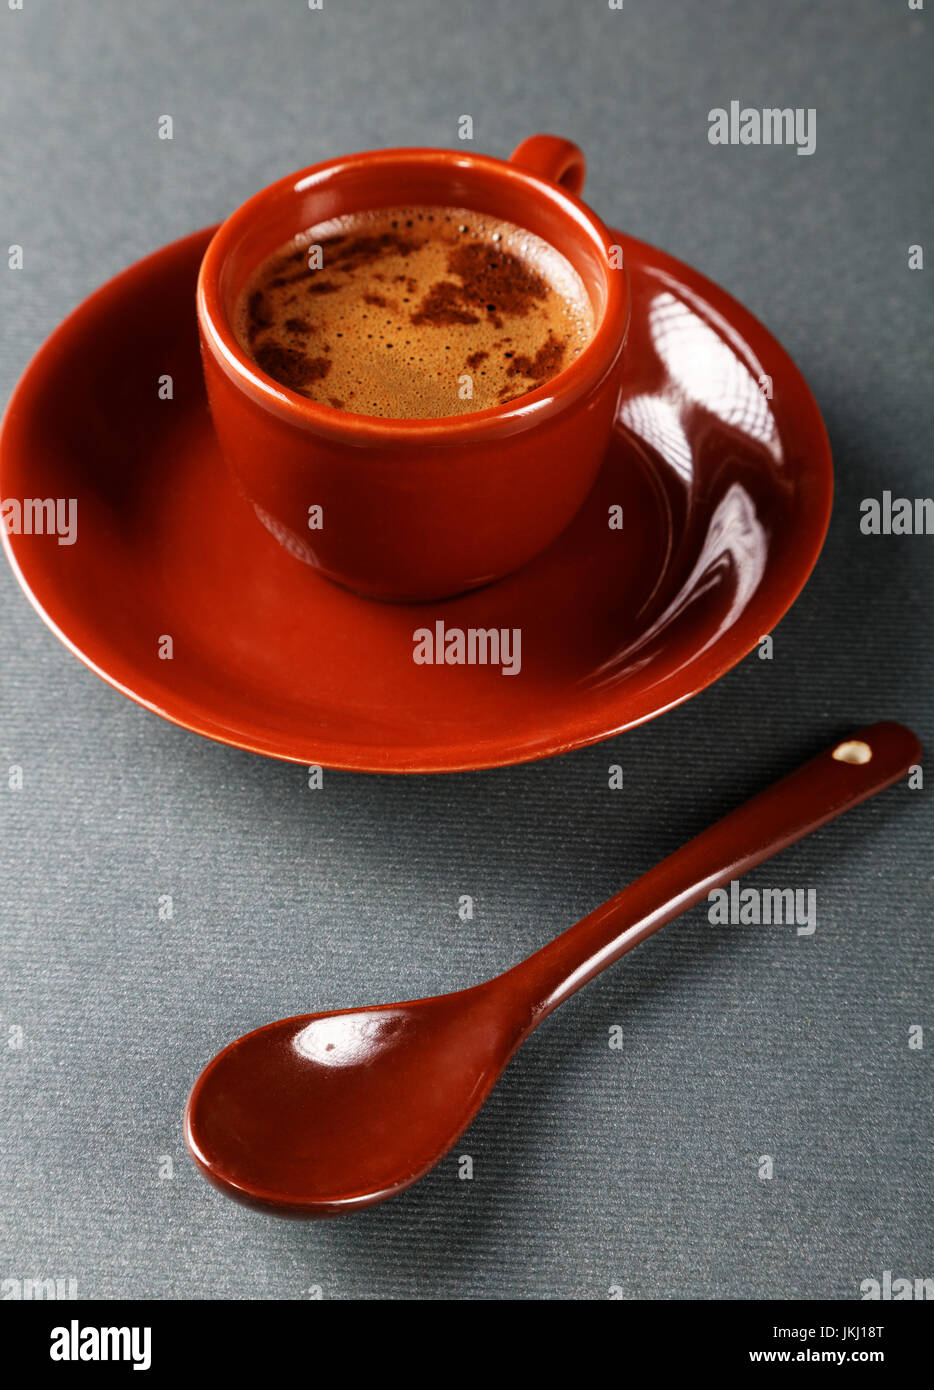 Small cup of coffee with a spoon and saucer Stock Photo